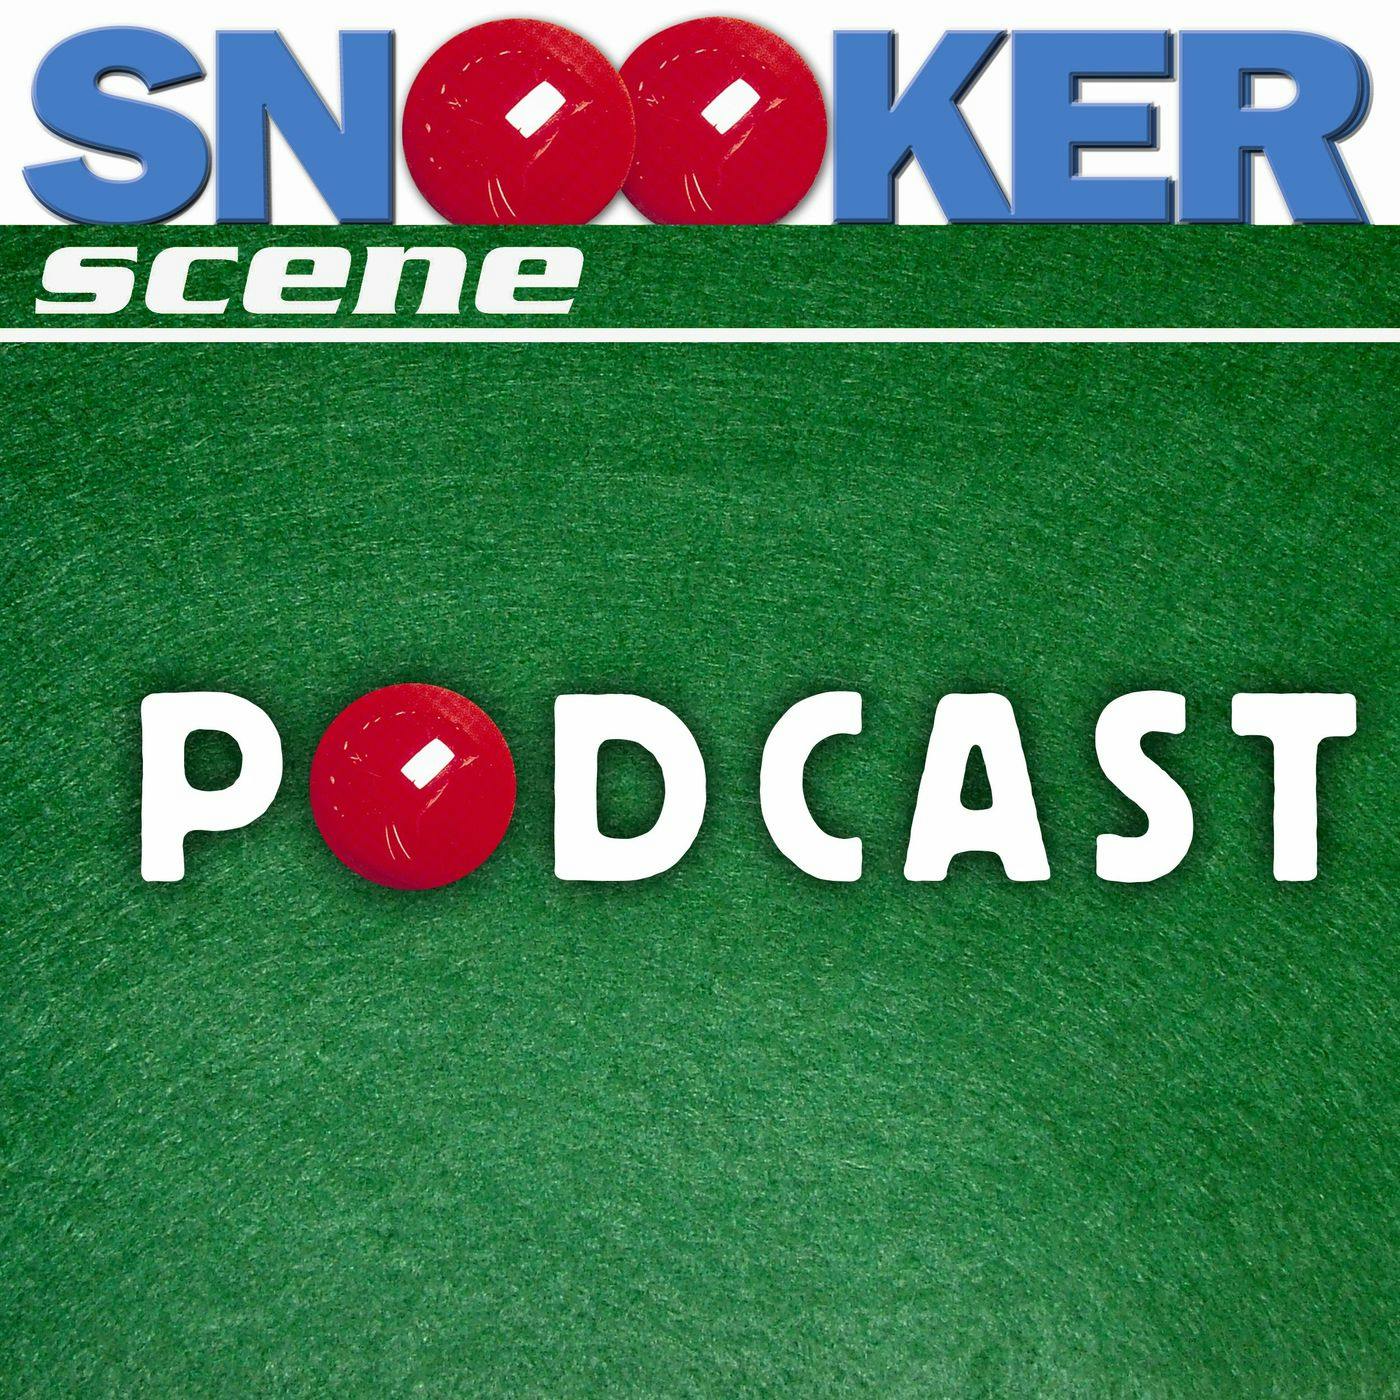 Snooker Scene Podcast episode 110 - Behind the scenes at the Championship League